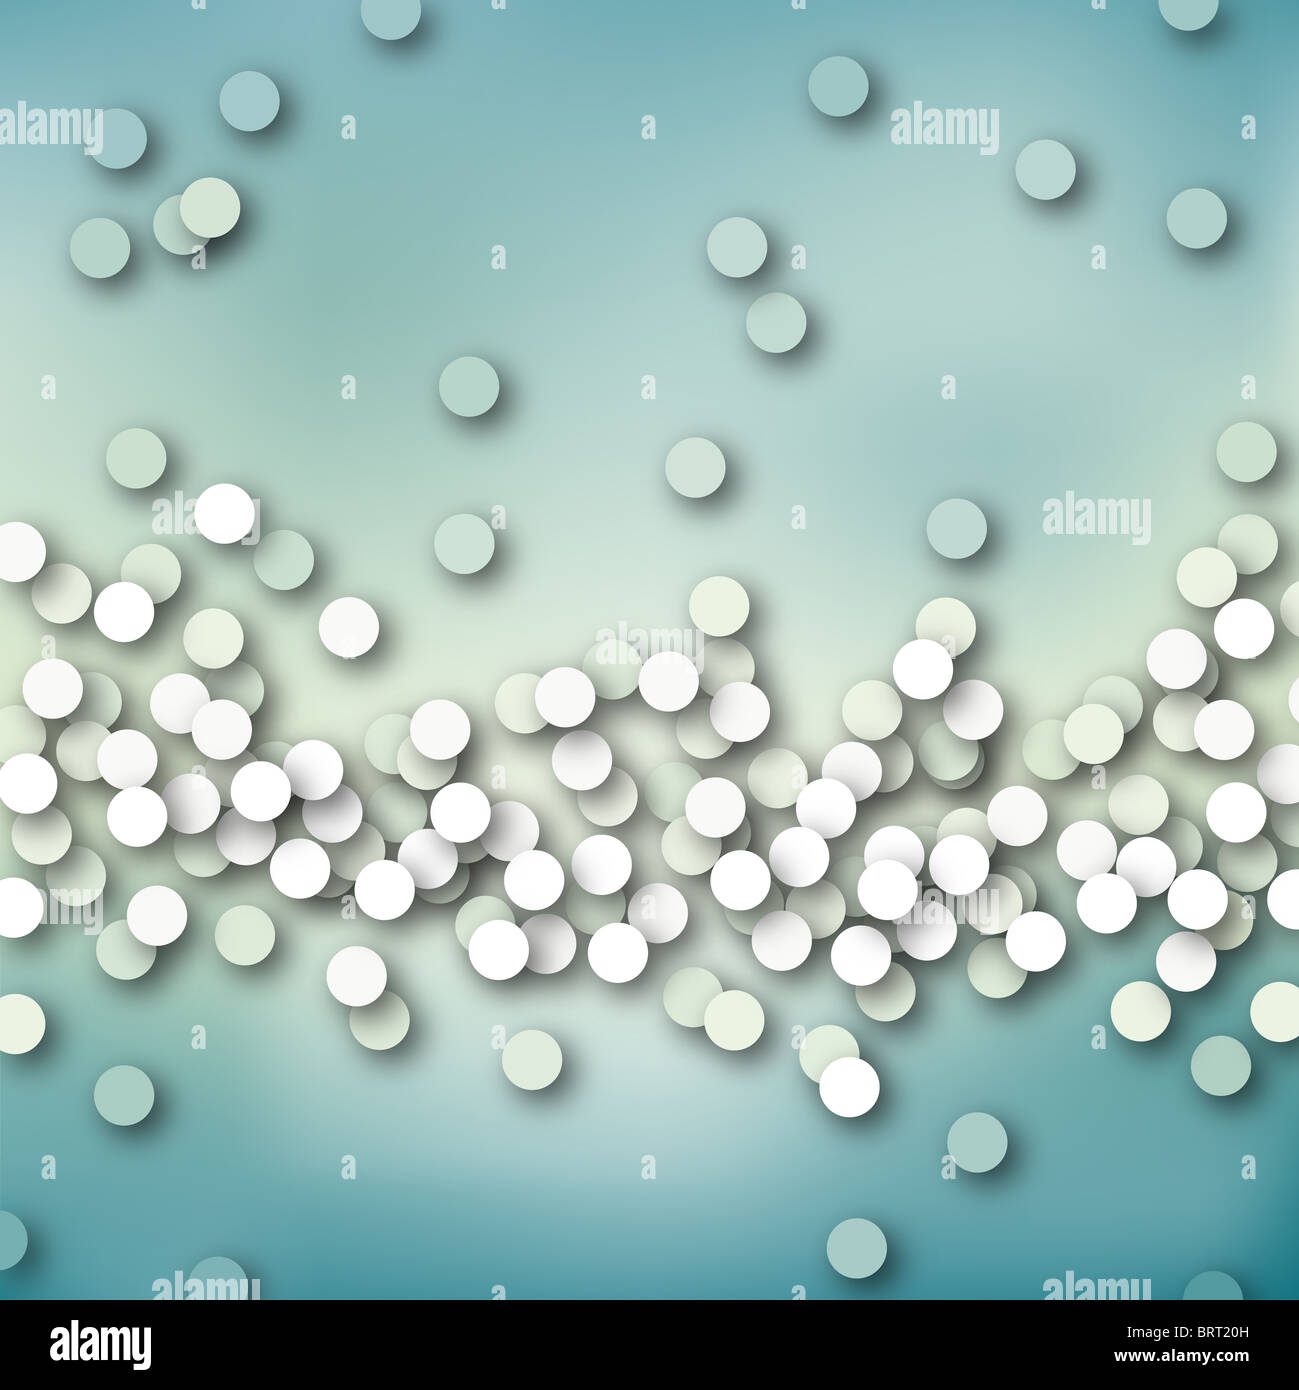 Abstract illustrated background of light dots and shadows Stock Photo